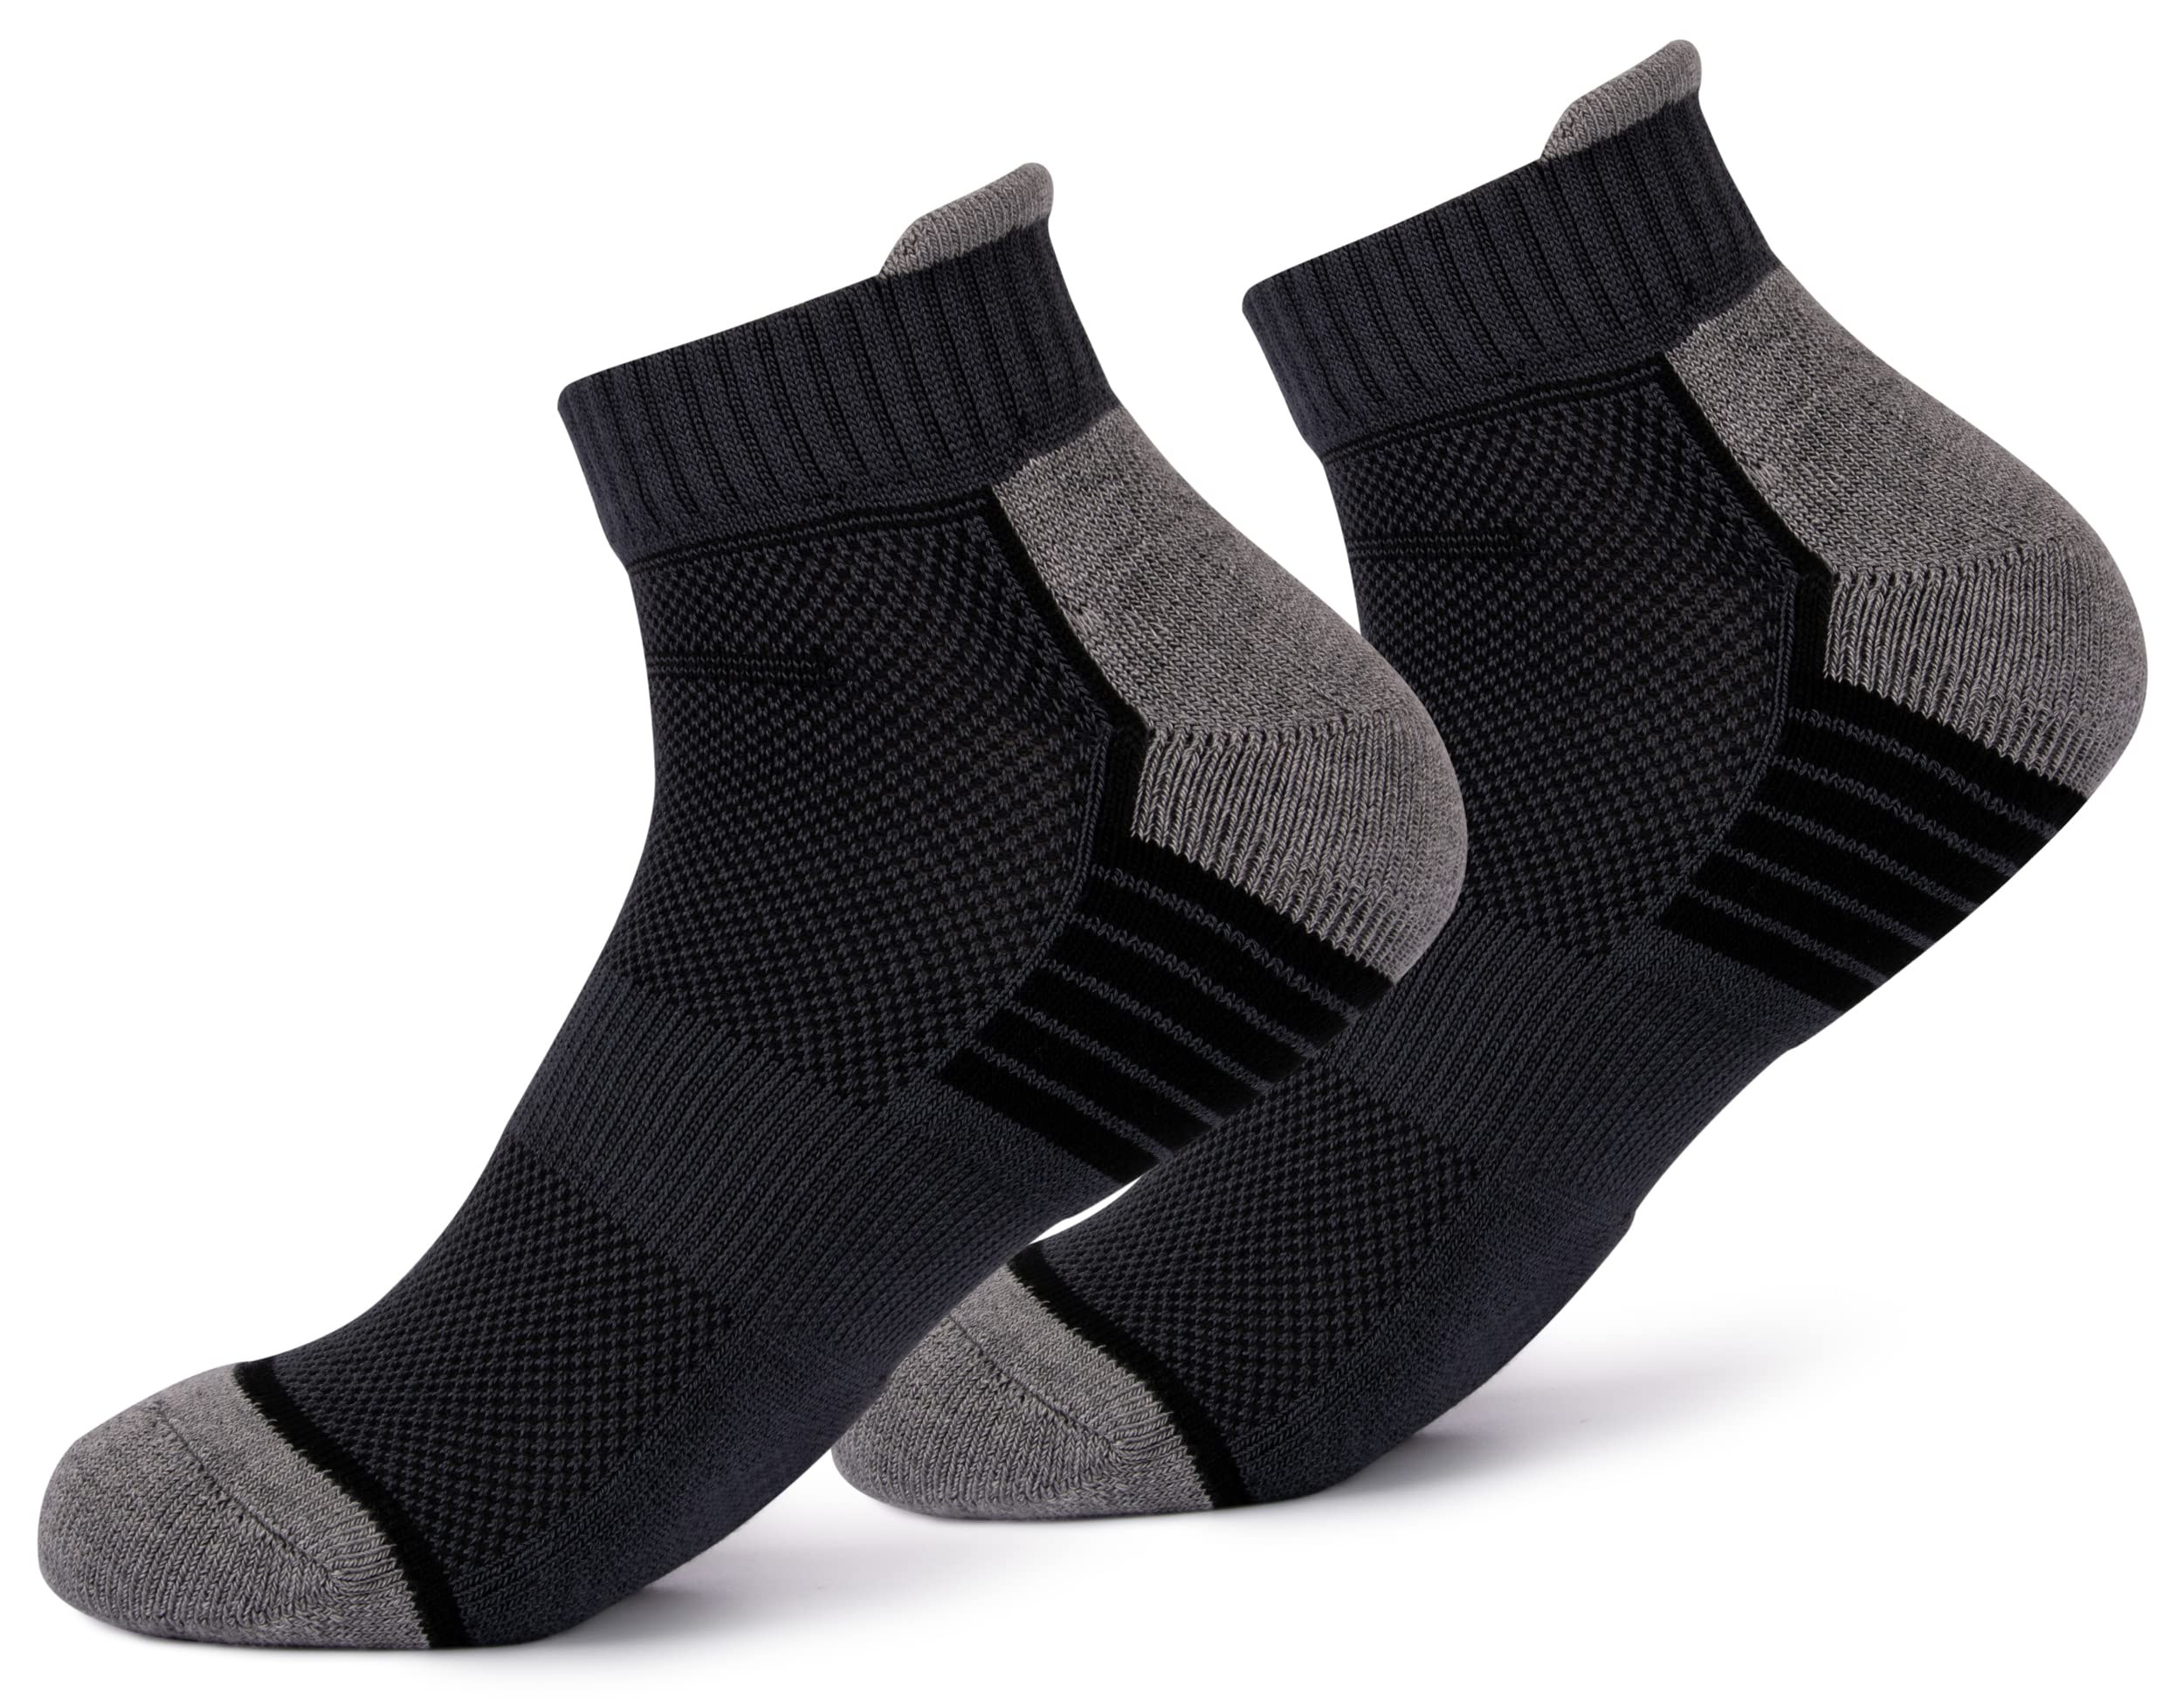 Mush Bamboo Performance Socks for Sports & Casual Wear-Ultra Soft, Anti Odor, Breathable Mesh Design Ankle Length (Pack of 3 Grey) UK Size 7-11